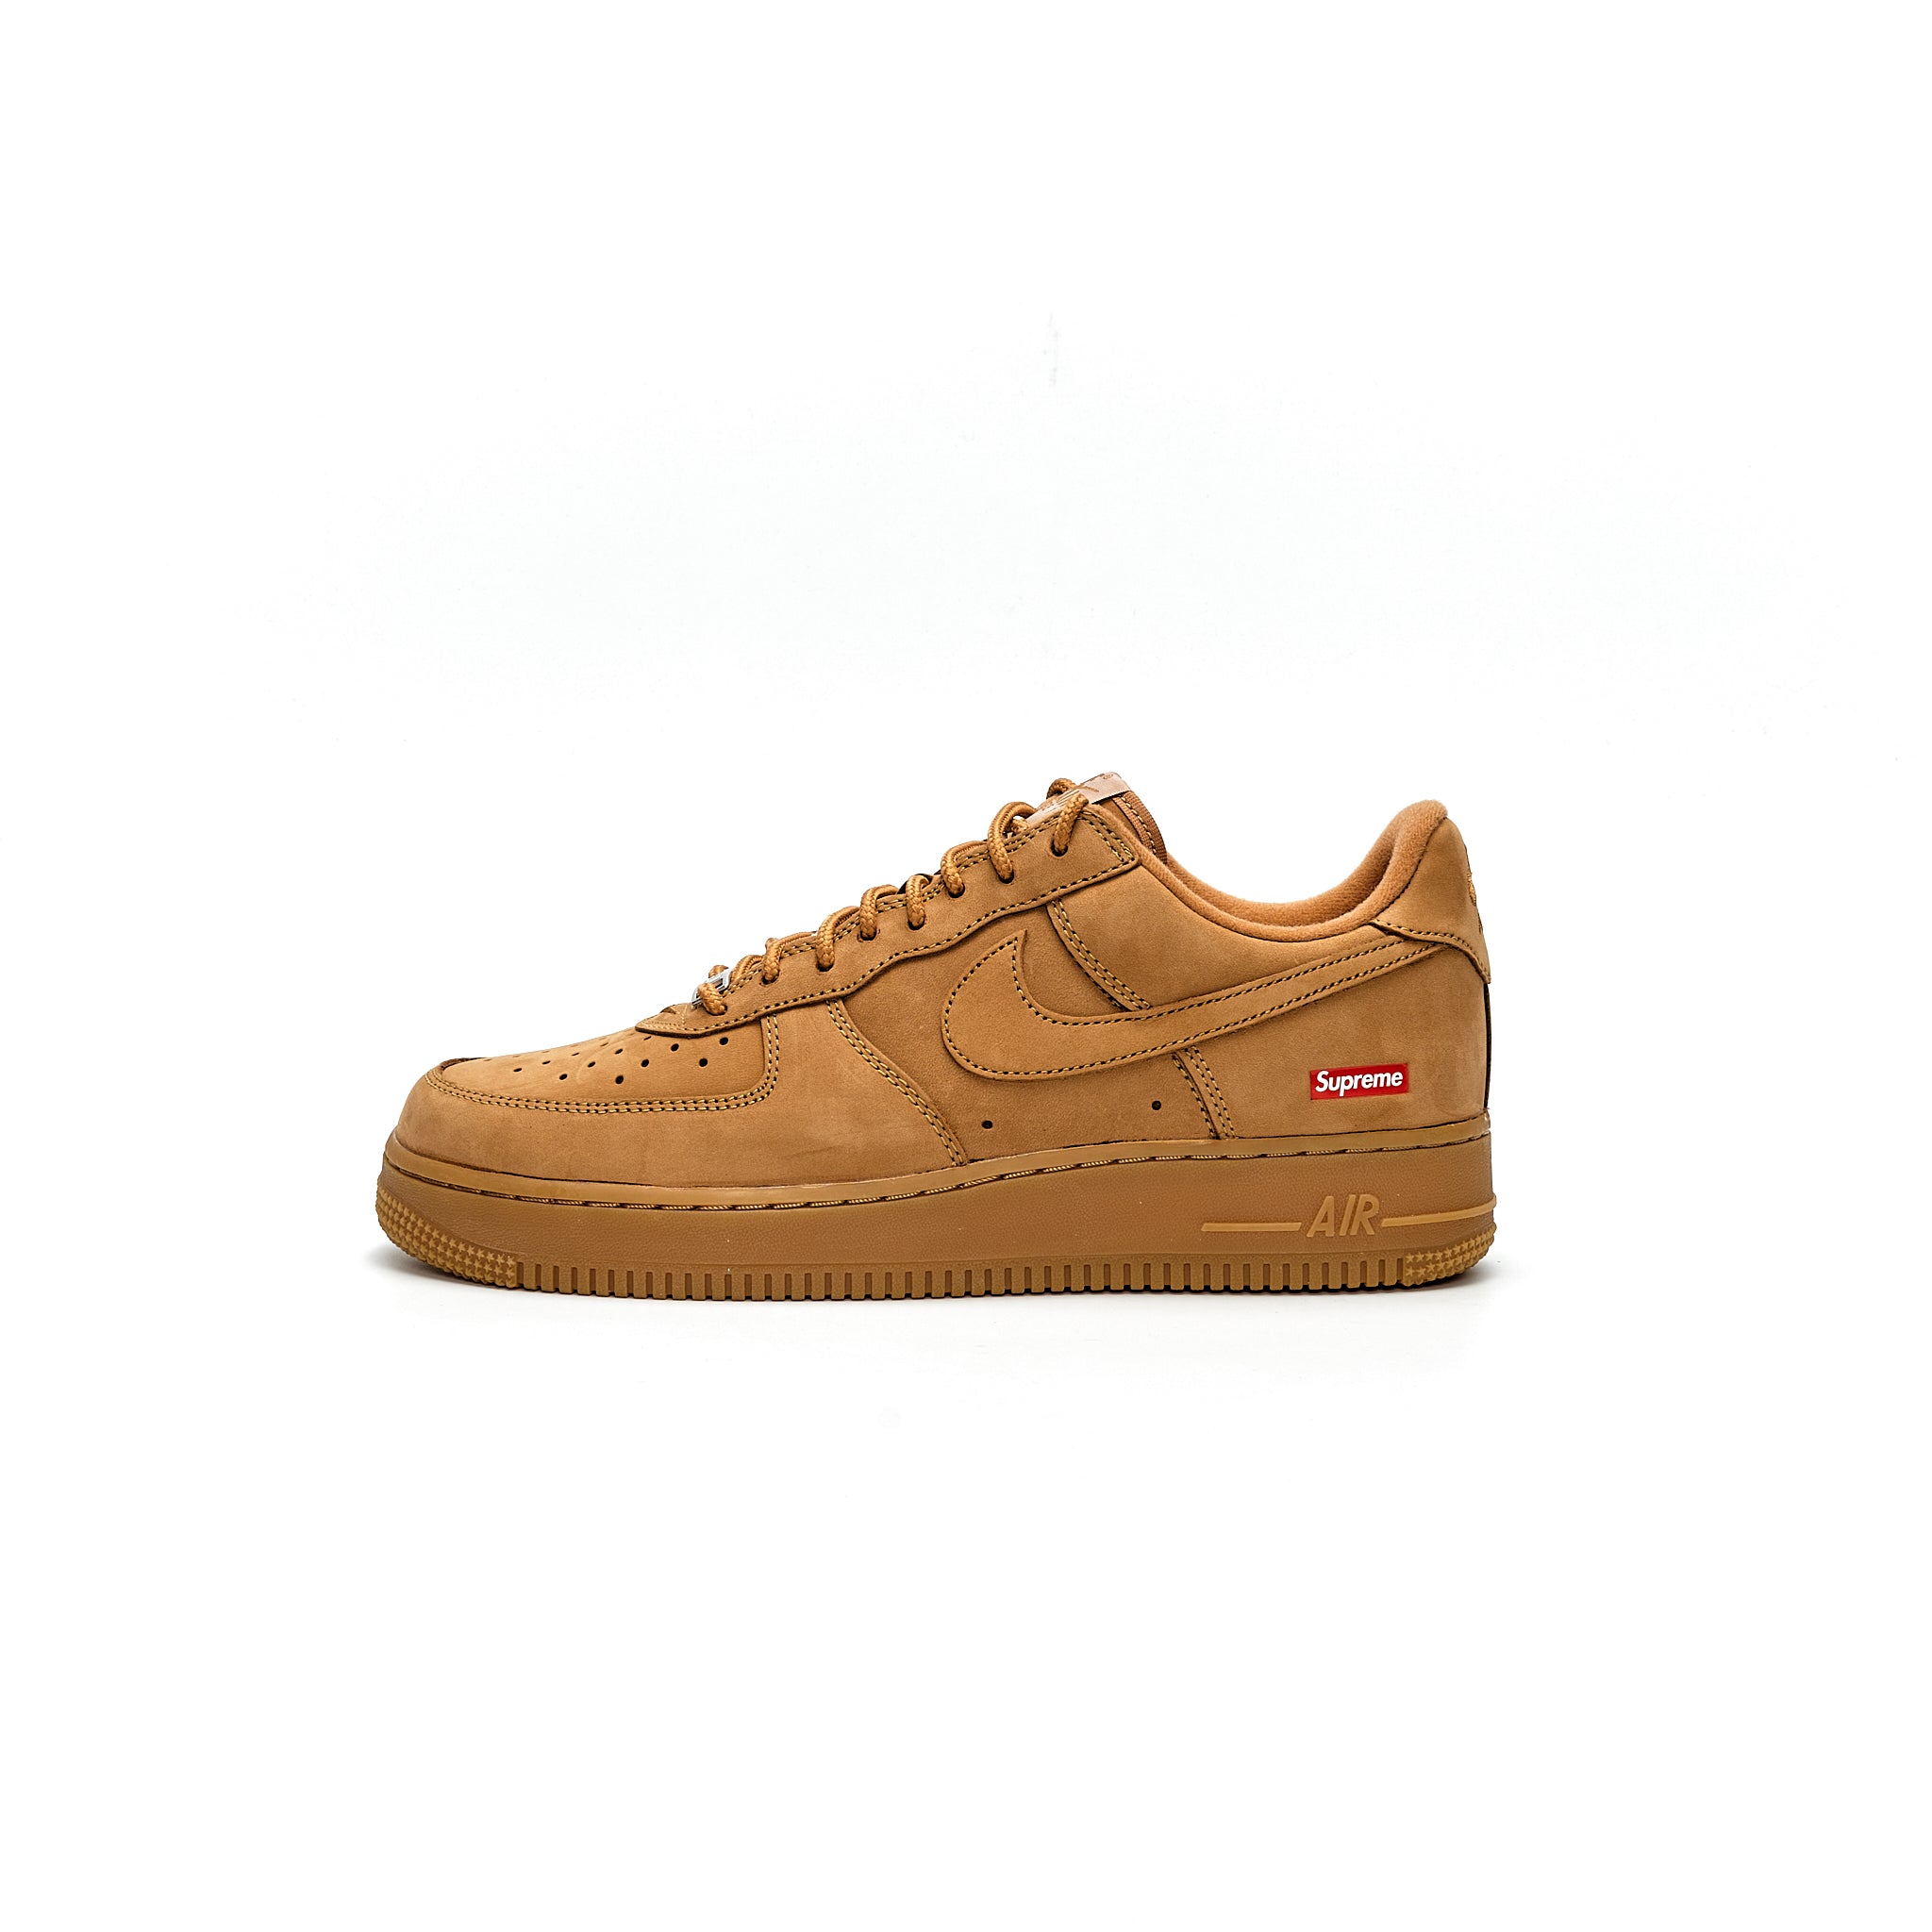 Nike Air Force 1 Low SP Supreme Wheat – Story Cape Town